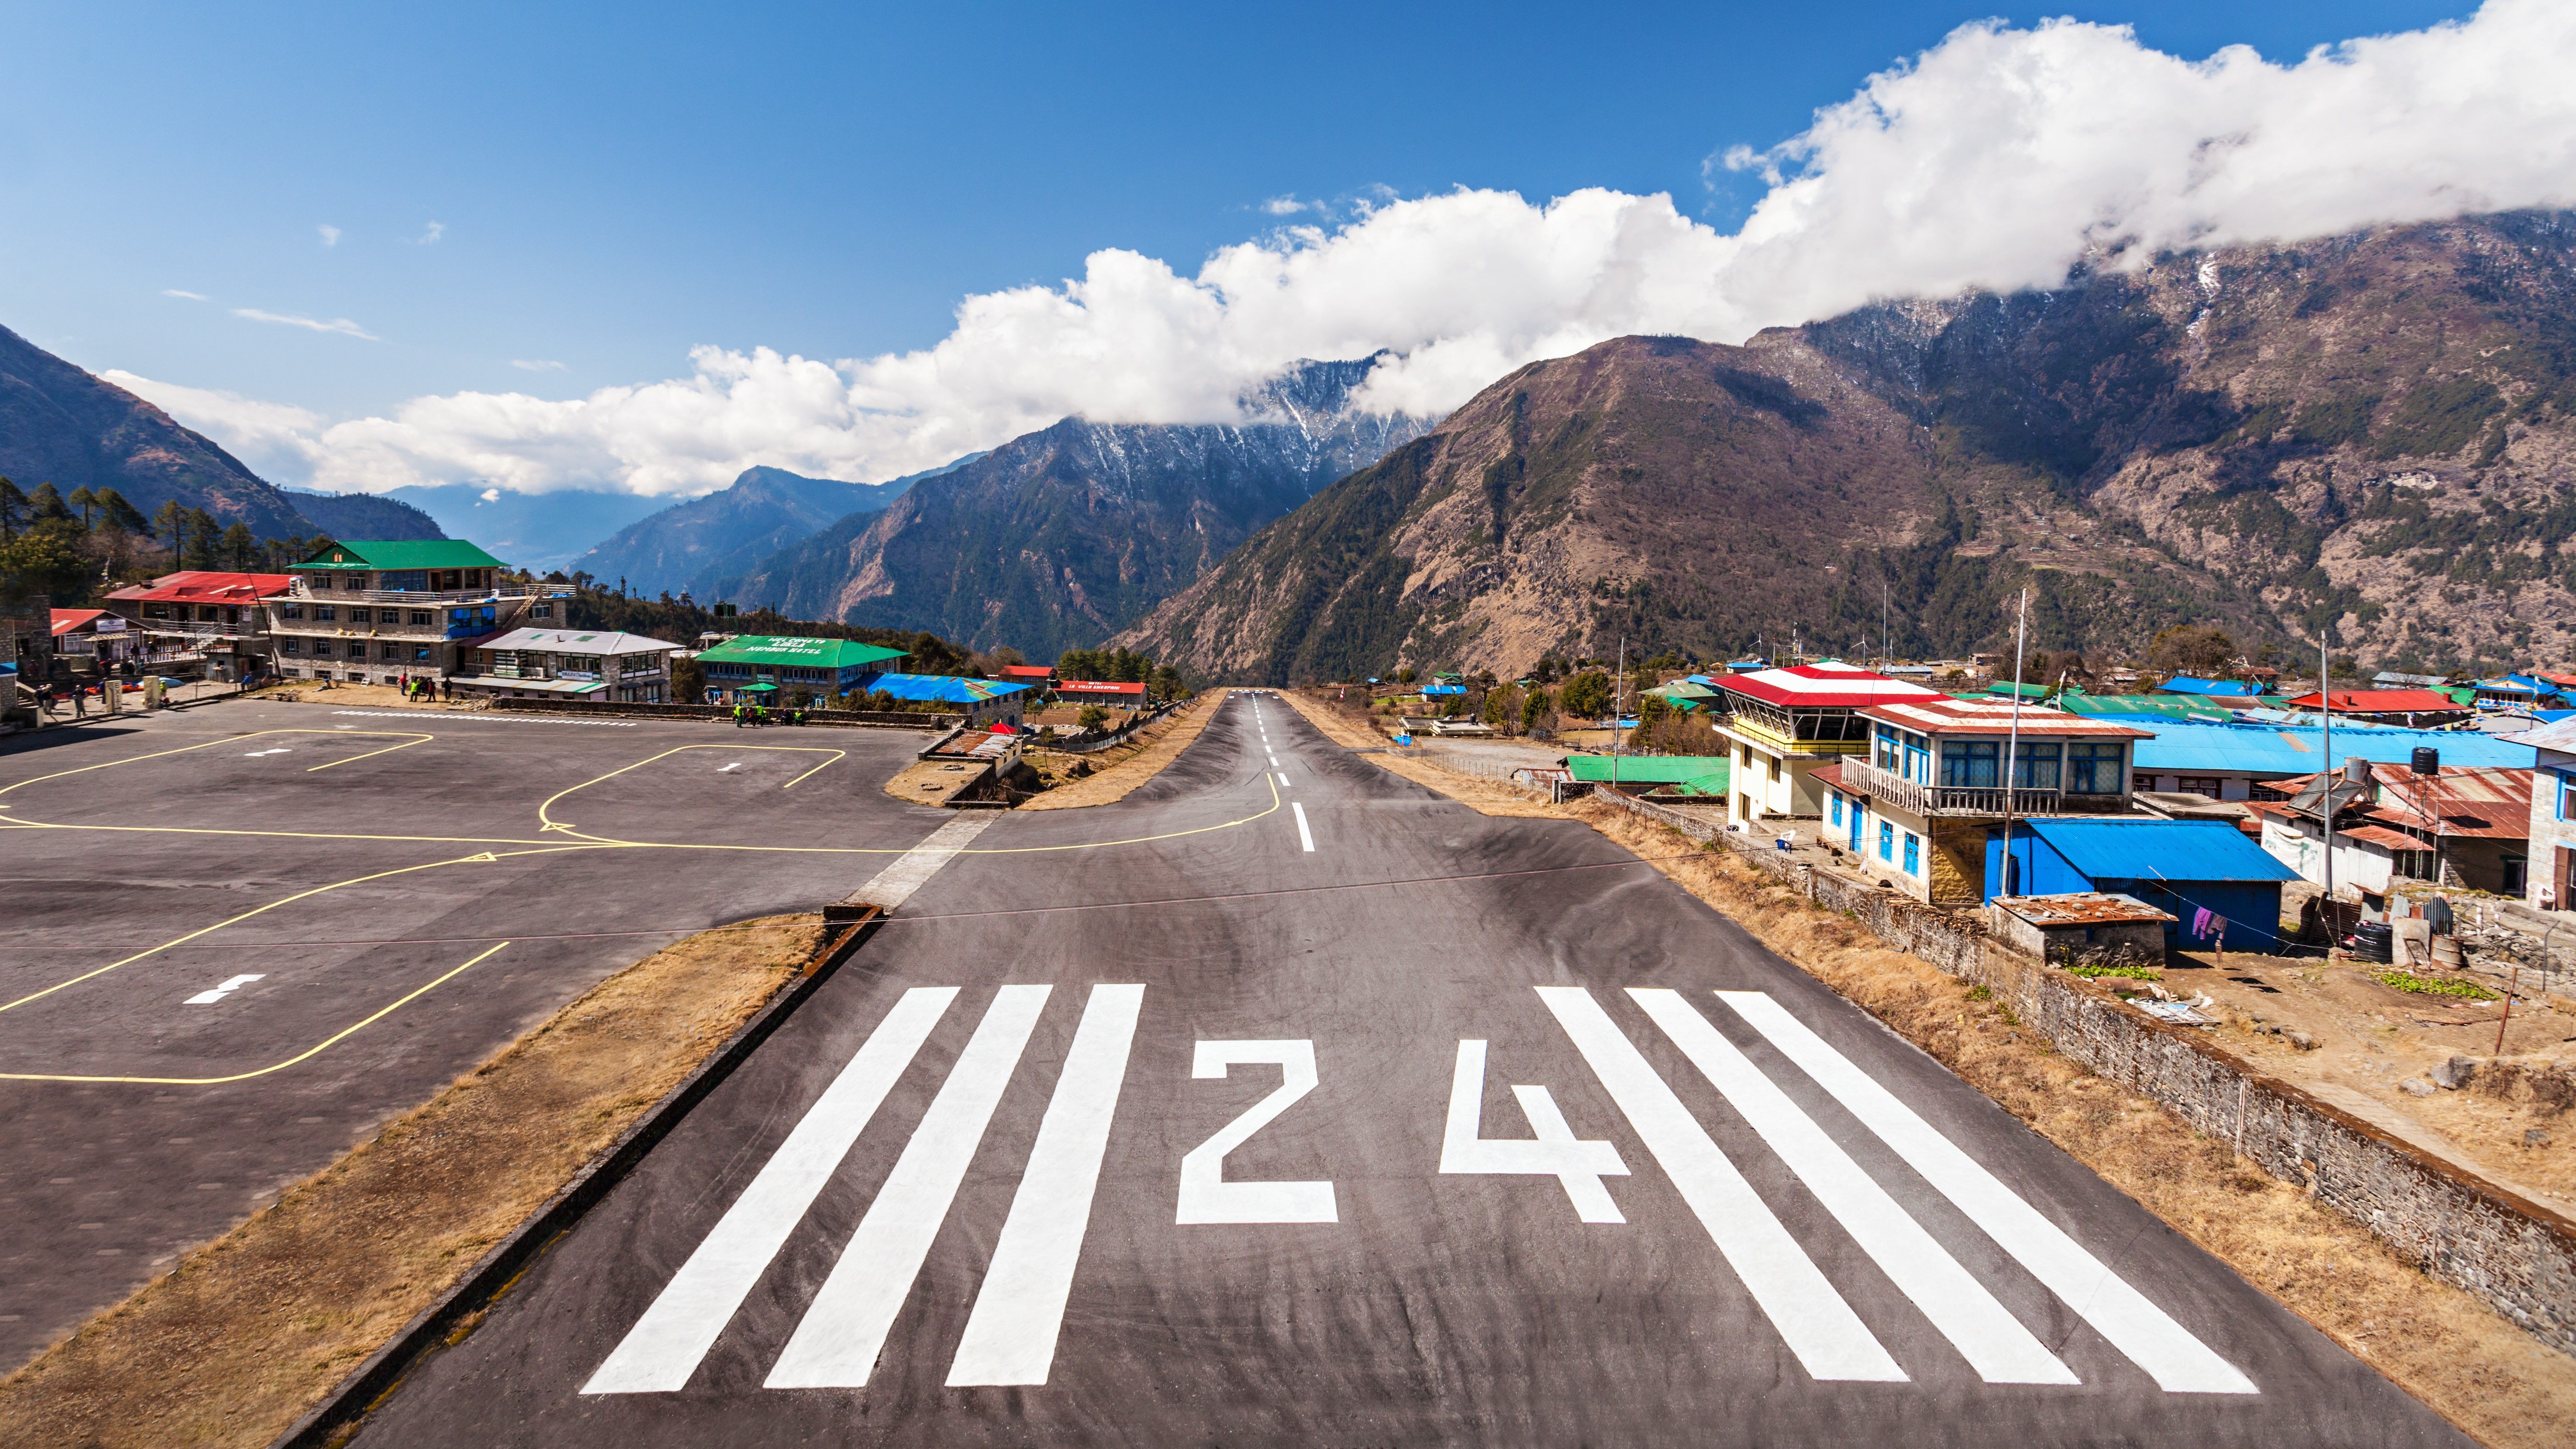 Looking out over Lukla Airport's Runway.